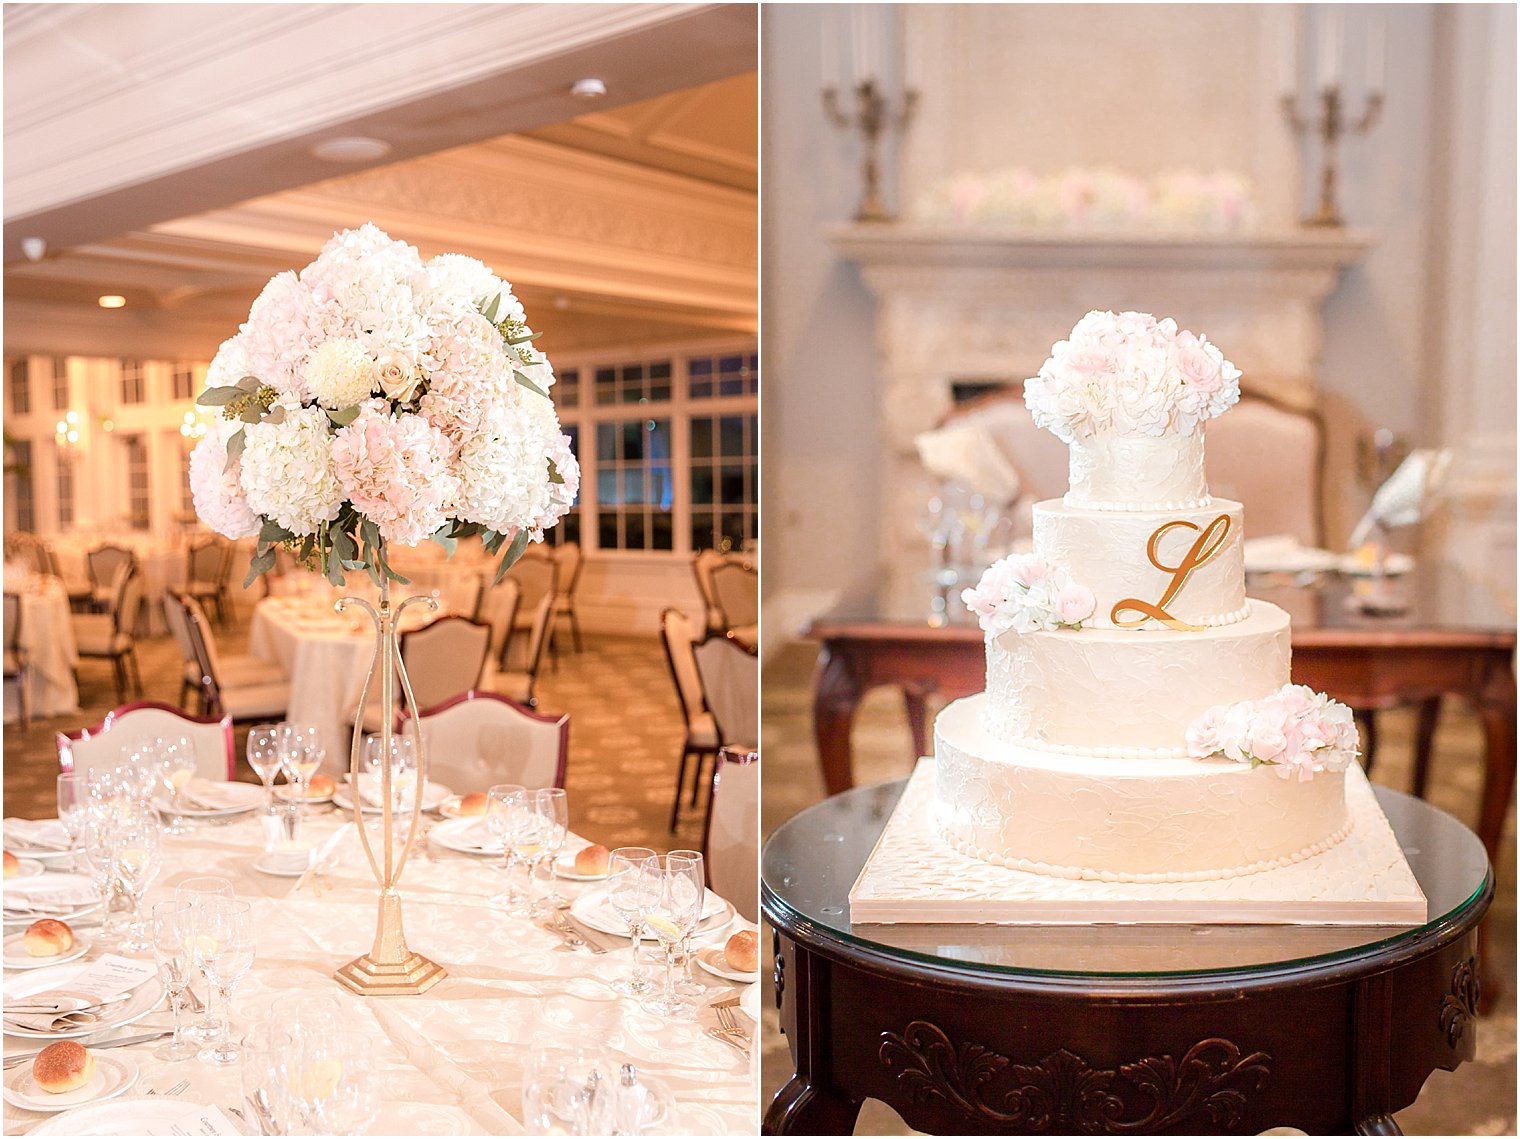 Center pieces by Yumila Florals and Cake by Palermo's Bakery